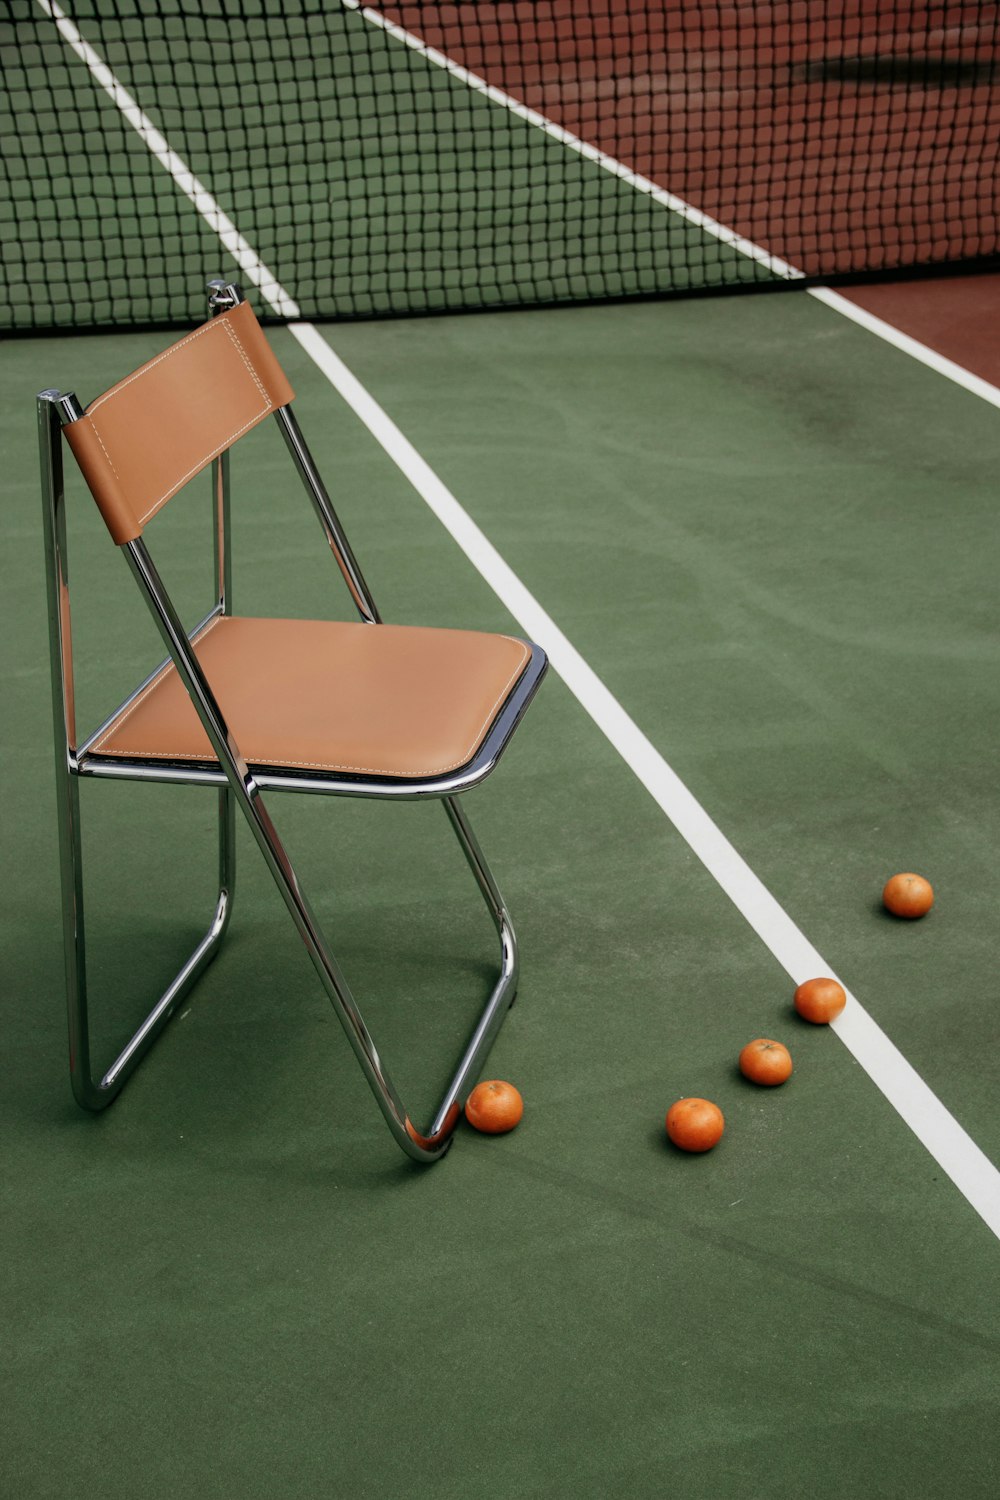 brown leather padded armless chair on tennis court